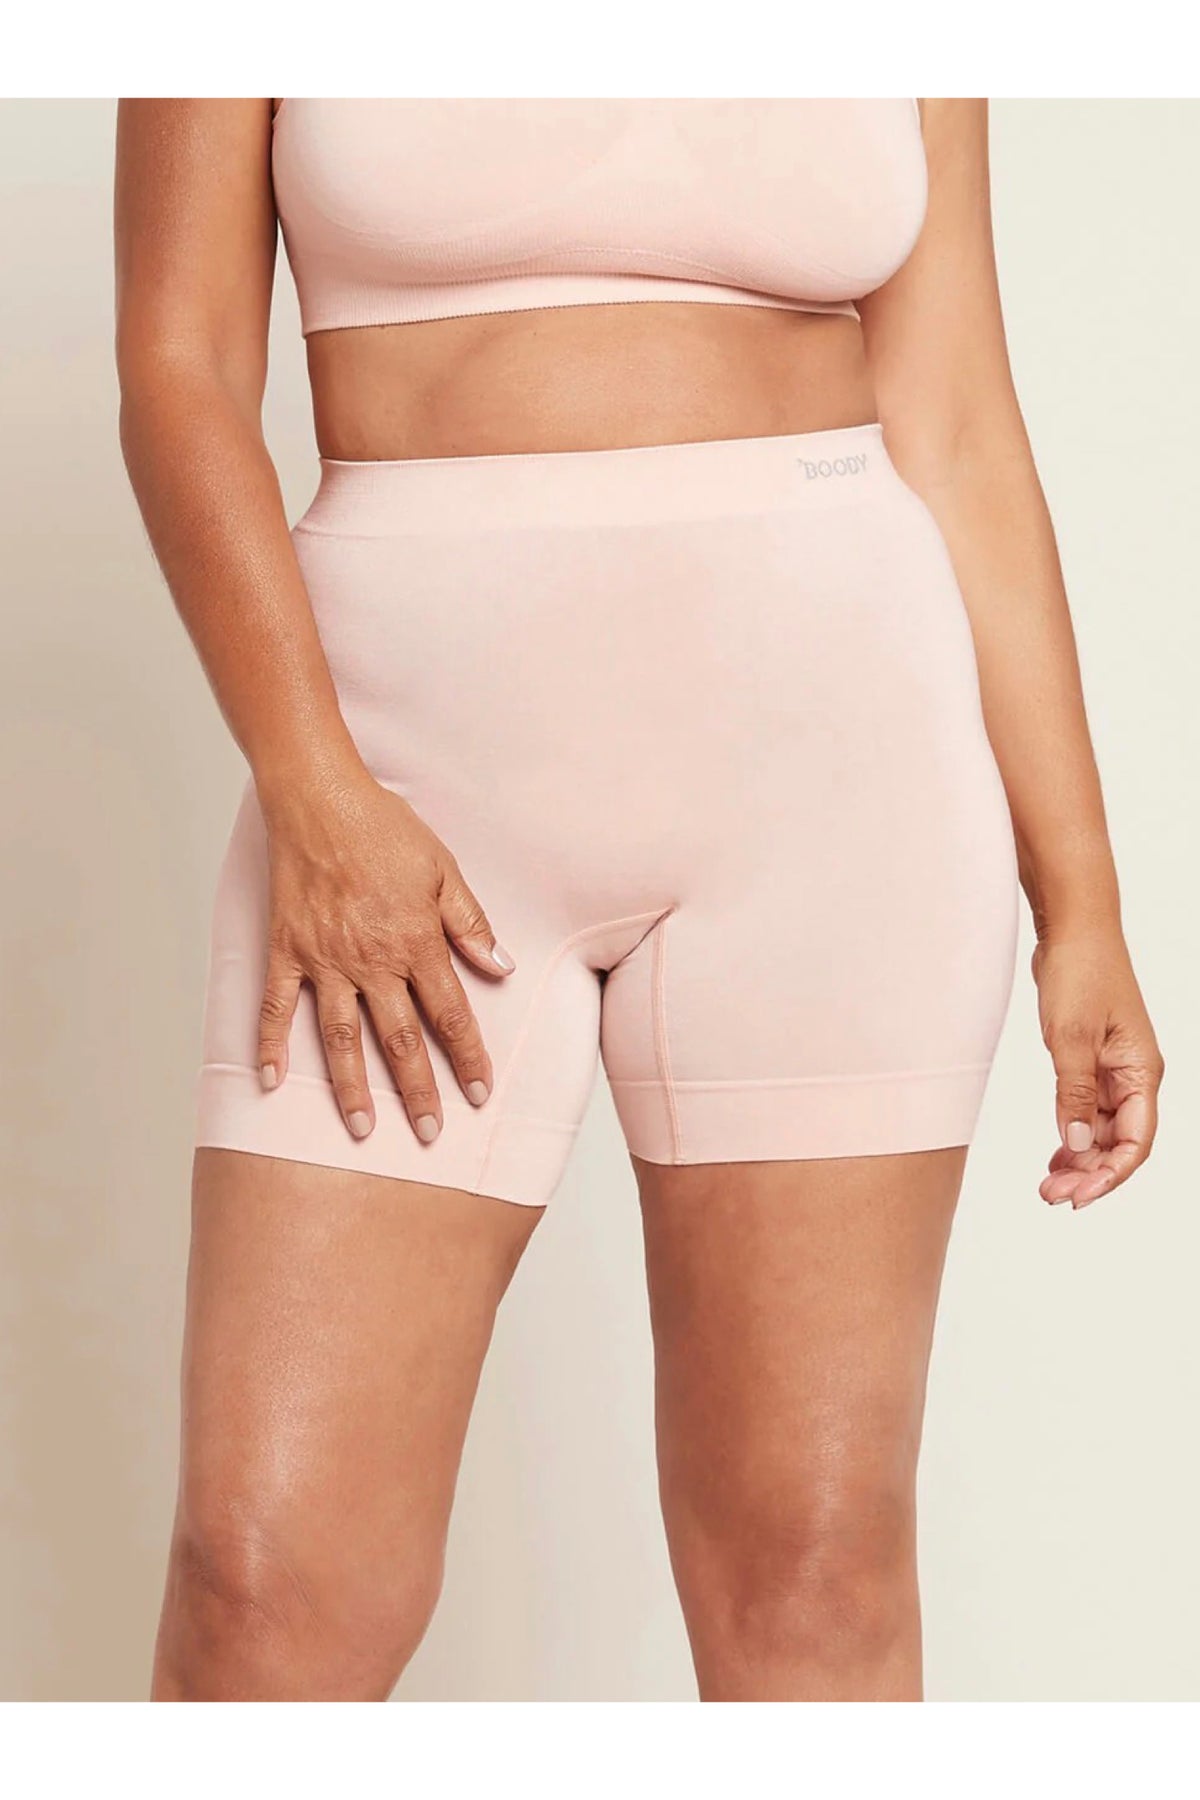 Boody Underwear – Mint Boutique LTD - All Rights Reserved